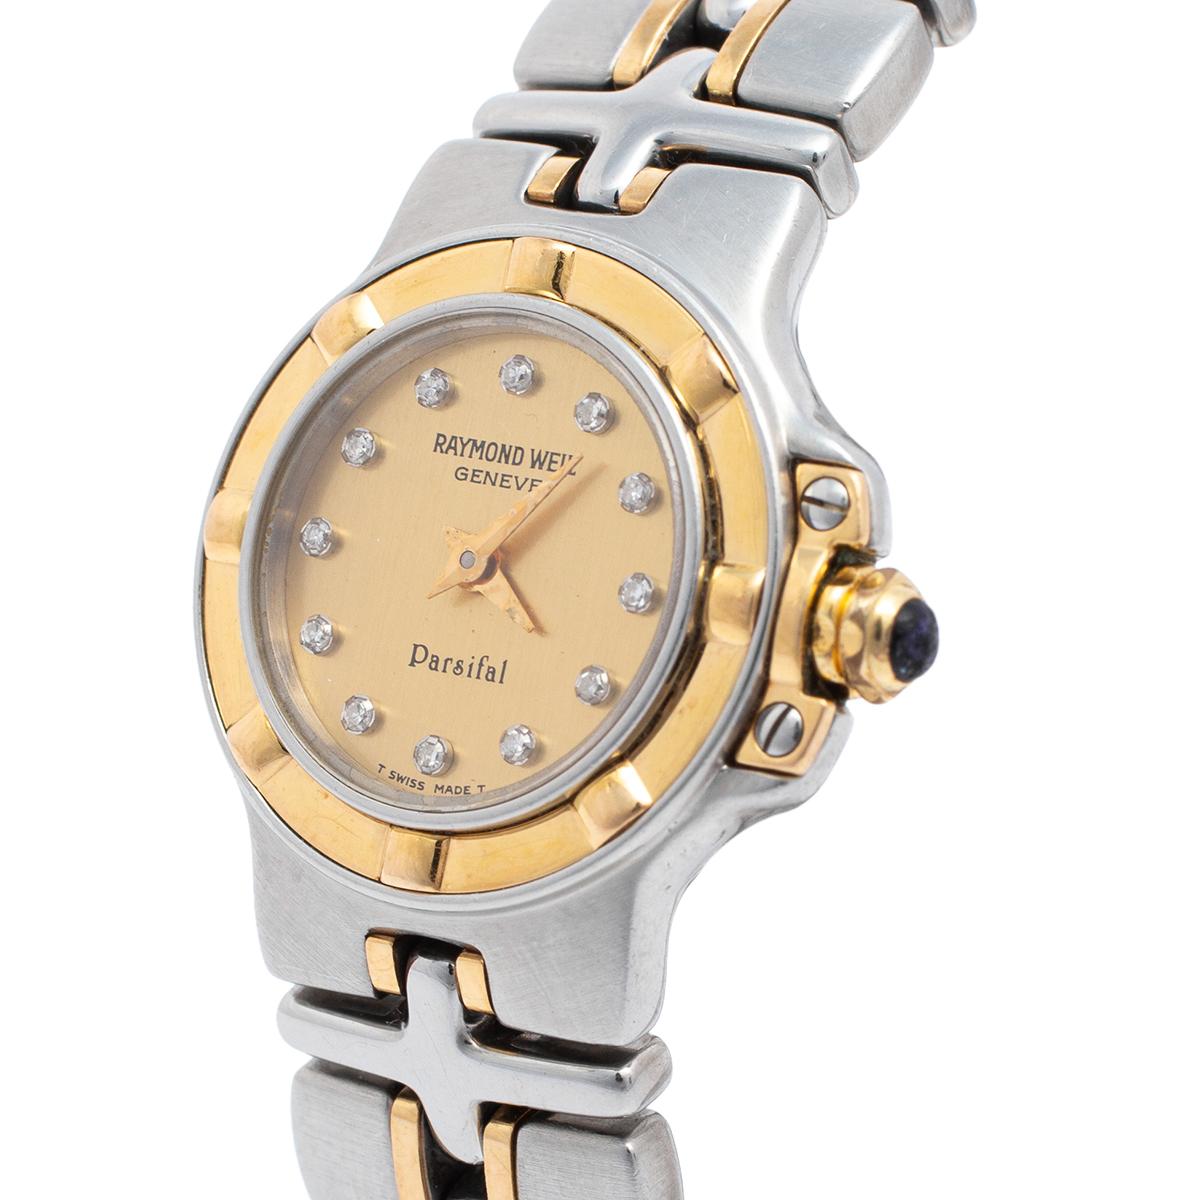 Keep time and accessorize your everyday style with this Raymond Weil watch. It is made from stainless steel and it has an 18k yellow gold bezel. On the champagne dial, there are diamond hour markers with two hands. It is complete with a water